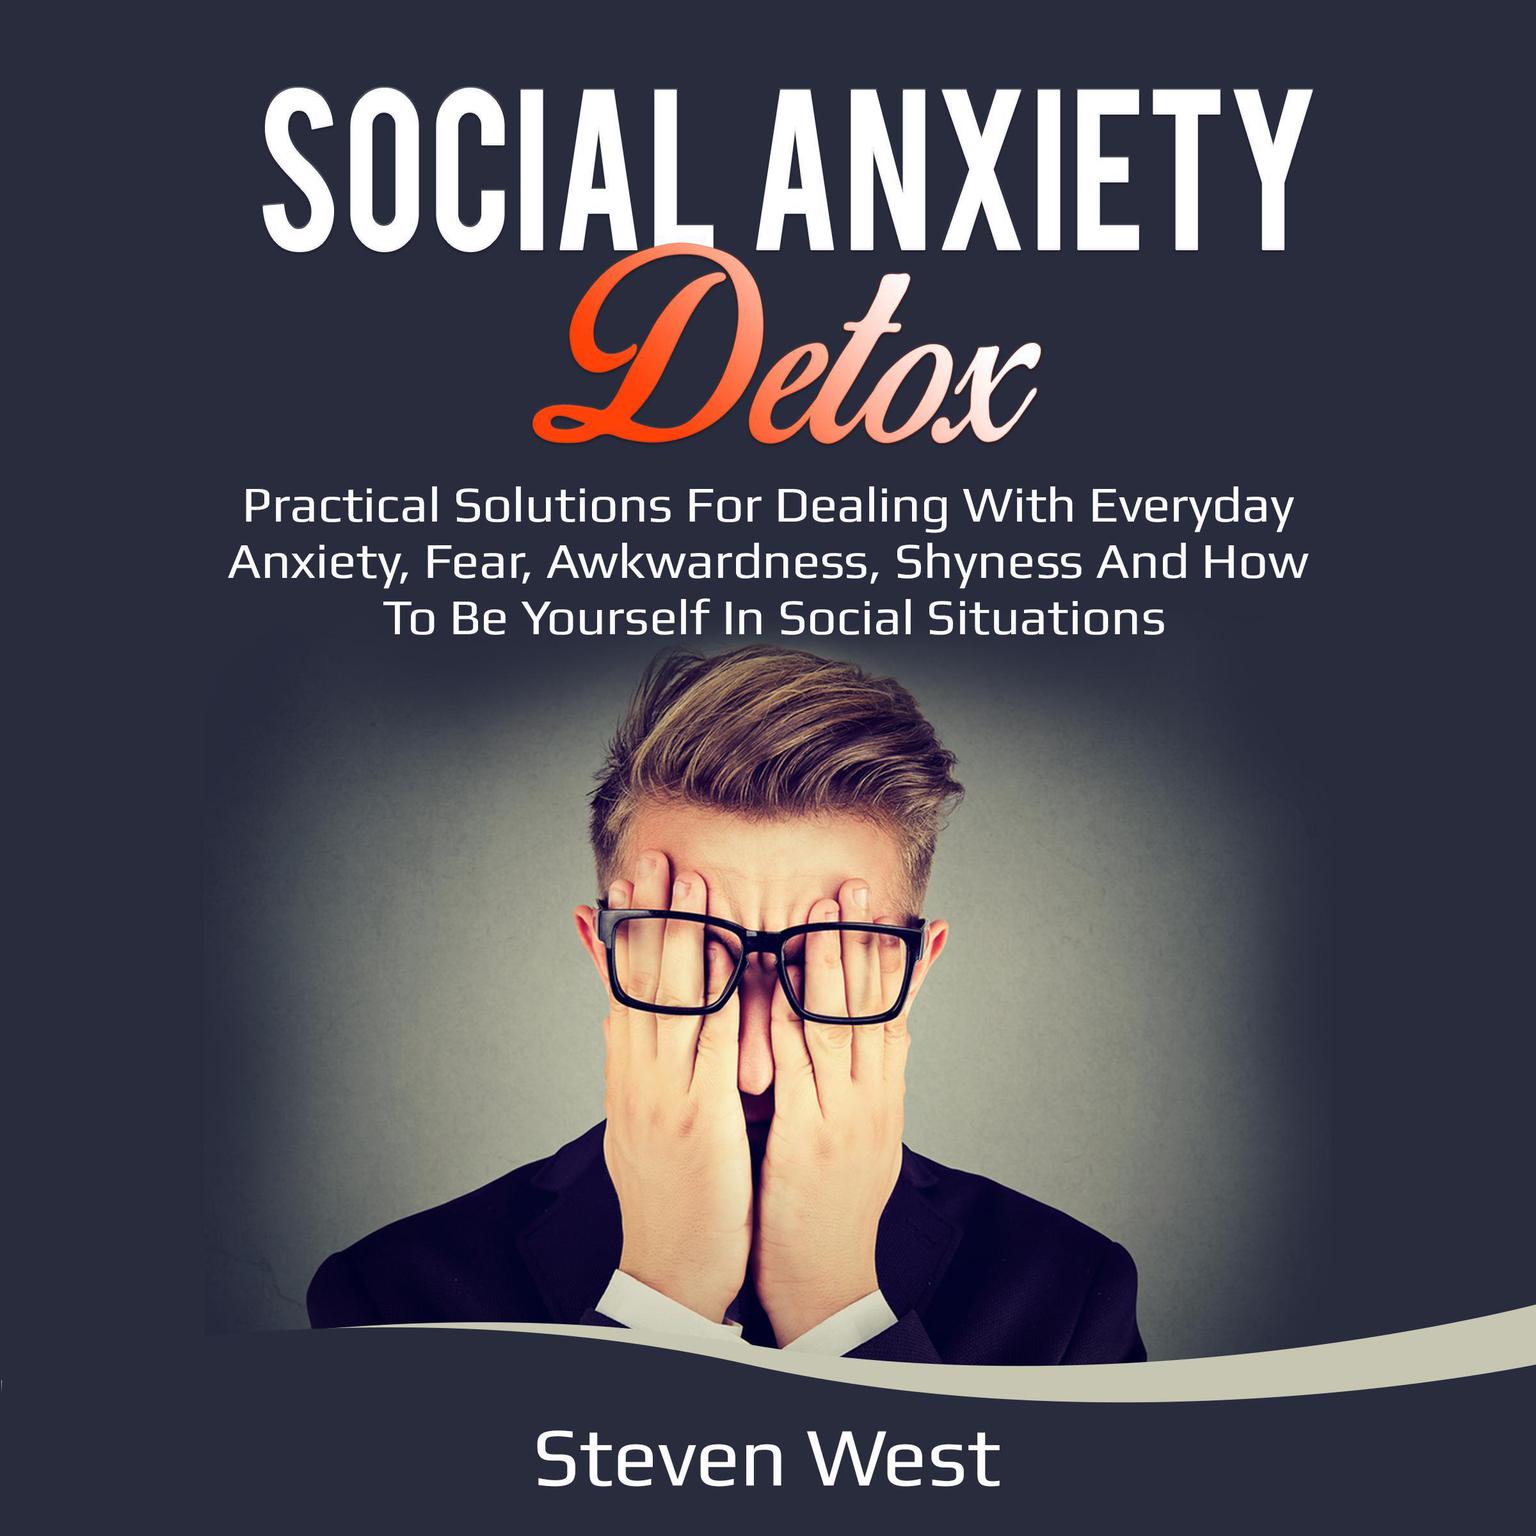 Social Anxiety Detox: Practical Solutions for Dealing with Everyday Anxiety, Fear, Awkwardness, Shyness and How to be Yourself in Social Situations Audiobook, by Steven West